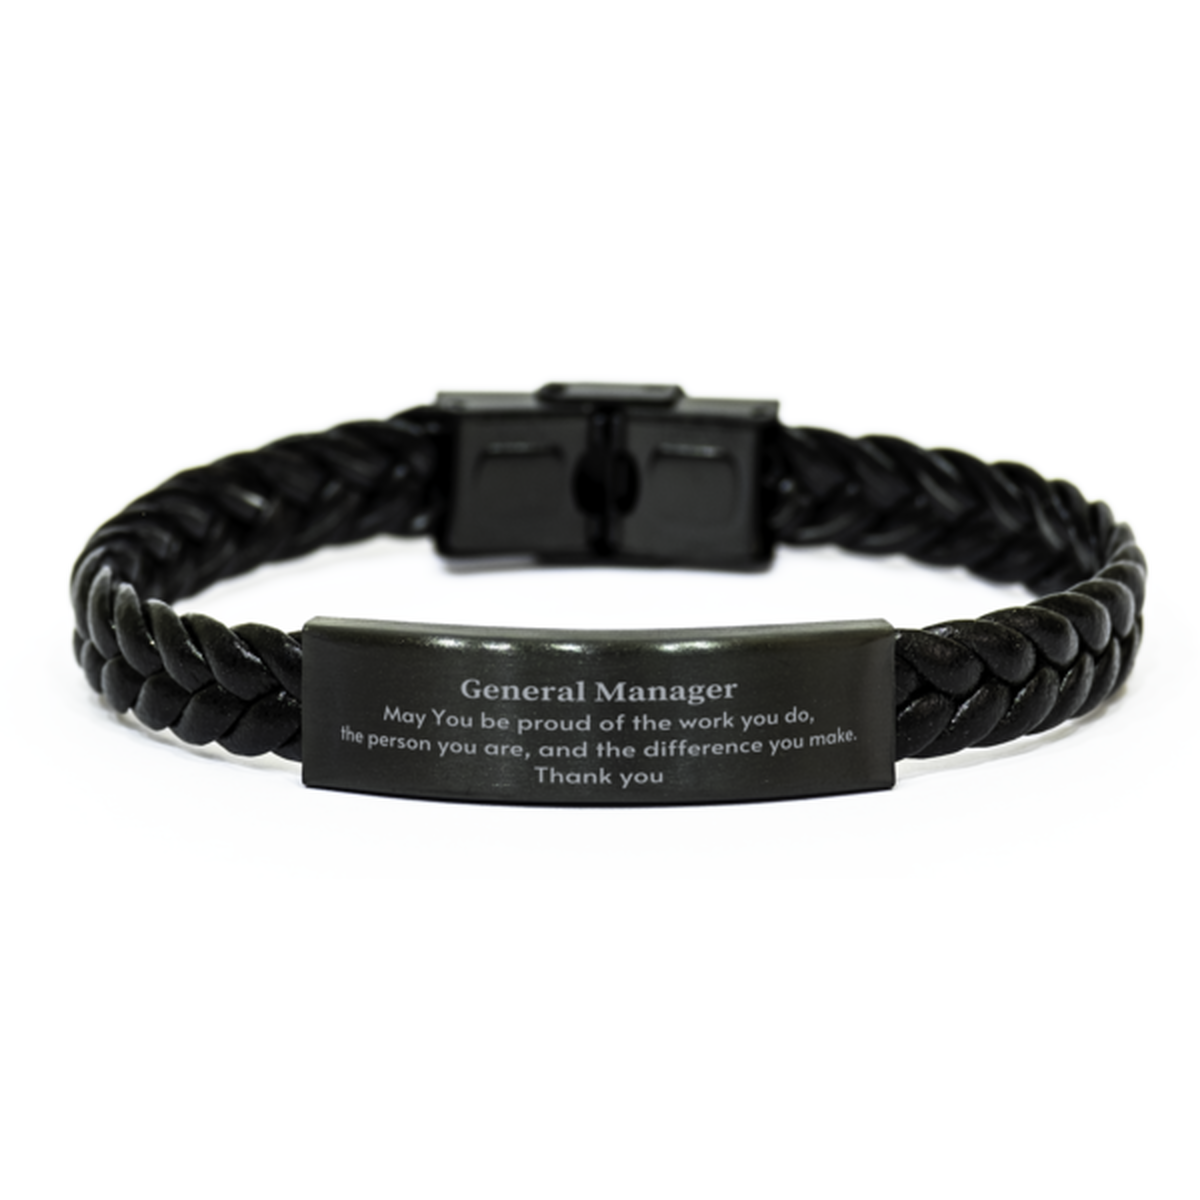 Heartwarming Braided Leather Bracelet Retirement Coworkers Gifts for General Manager, General Manager May You be proud of the work you do, the person you are Gifts for Boss Men Women Friends